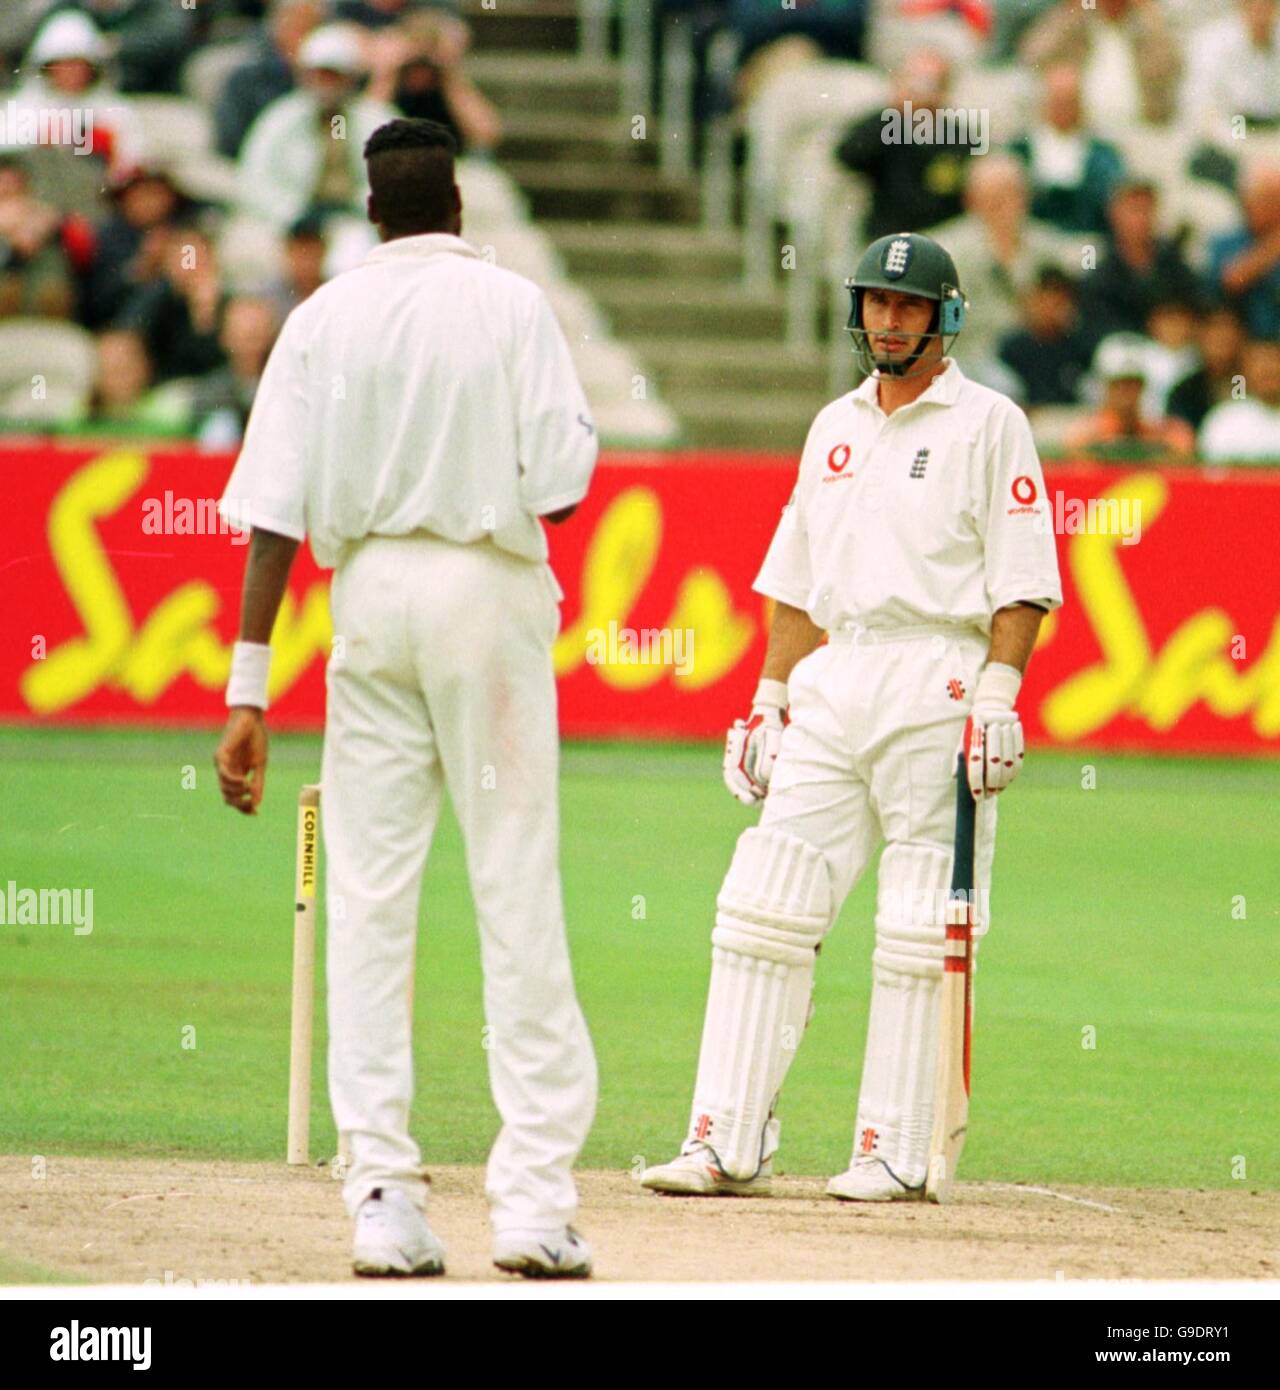 Cricket - Third Cornhill Insurance Test - England v West Indies - Fifth Day. West Indies' Curtly Ambrose gives England's captain Nasser Hussain a hard stare Stock Photo